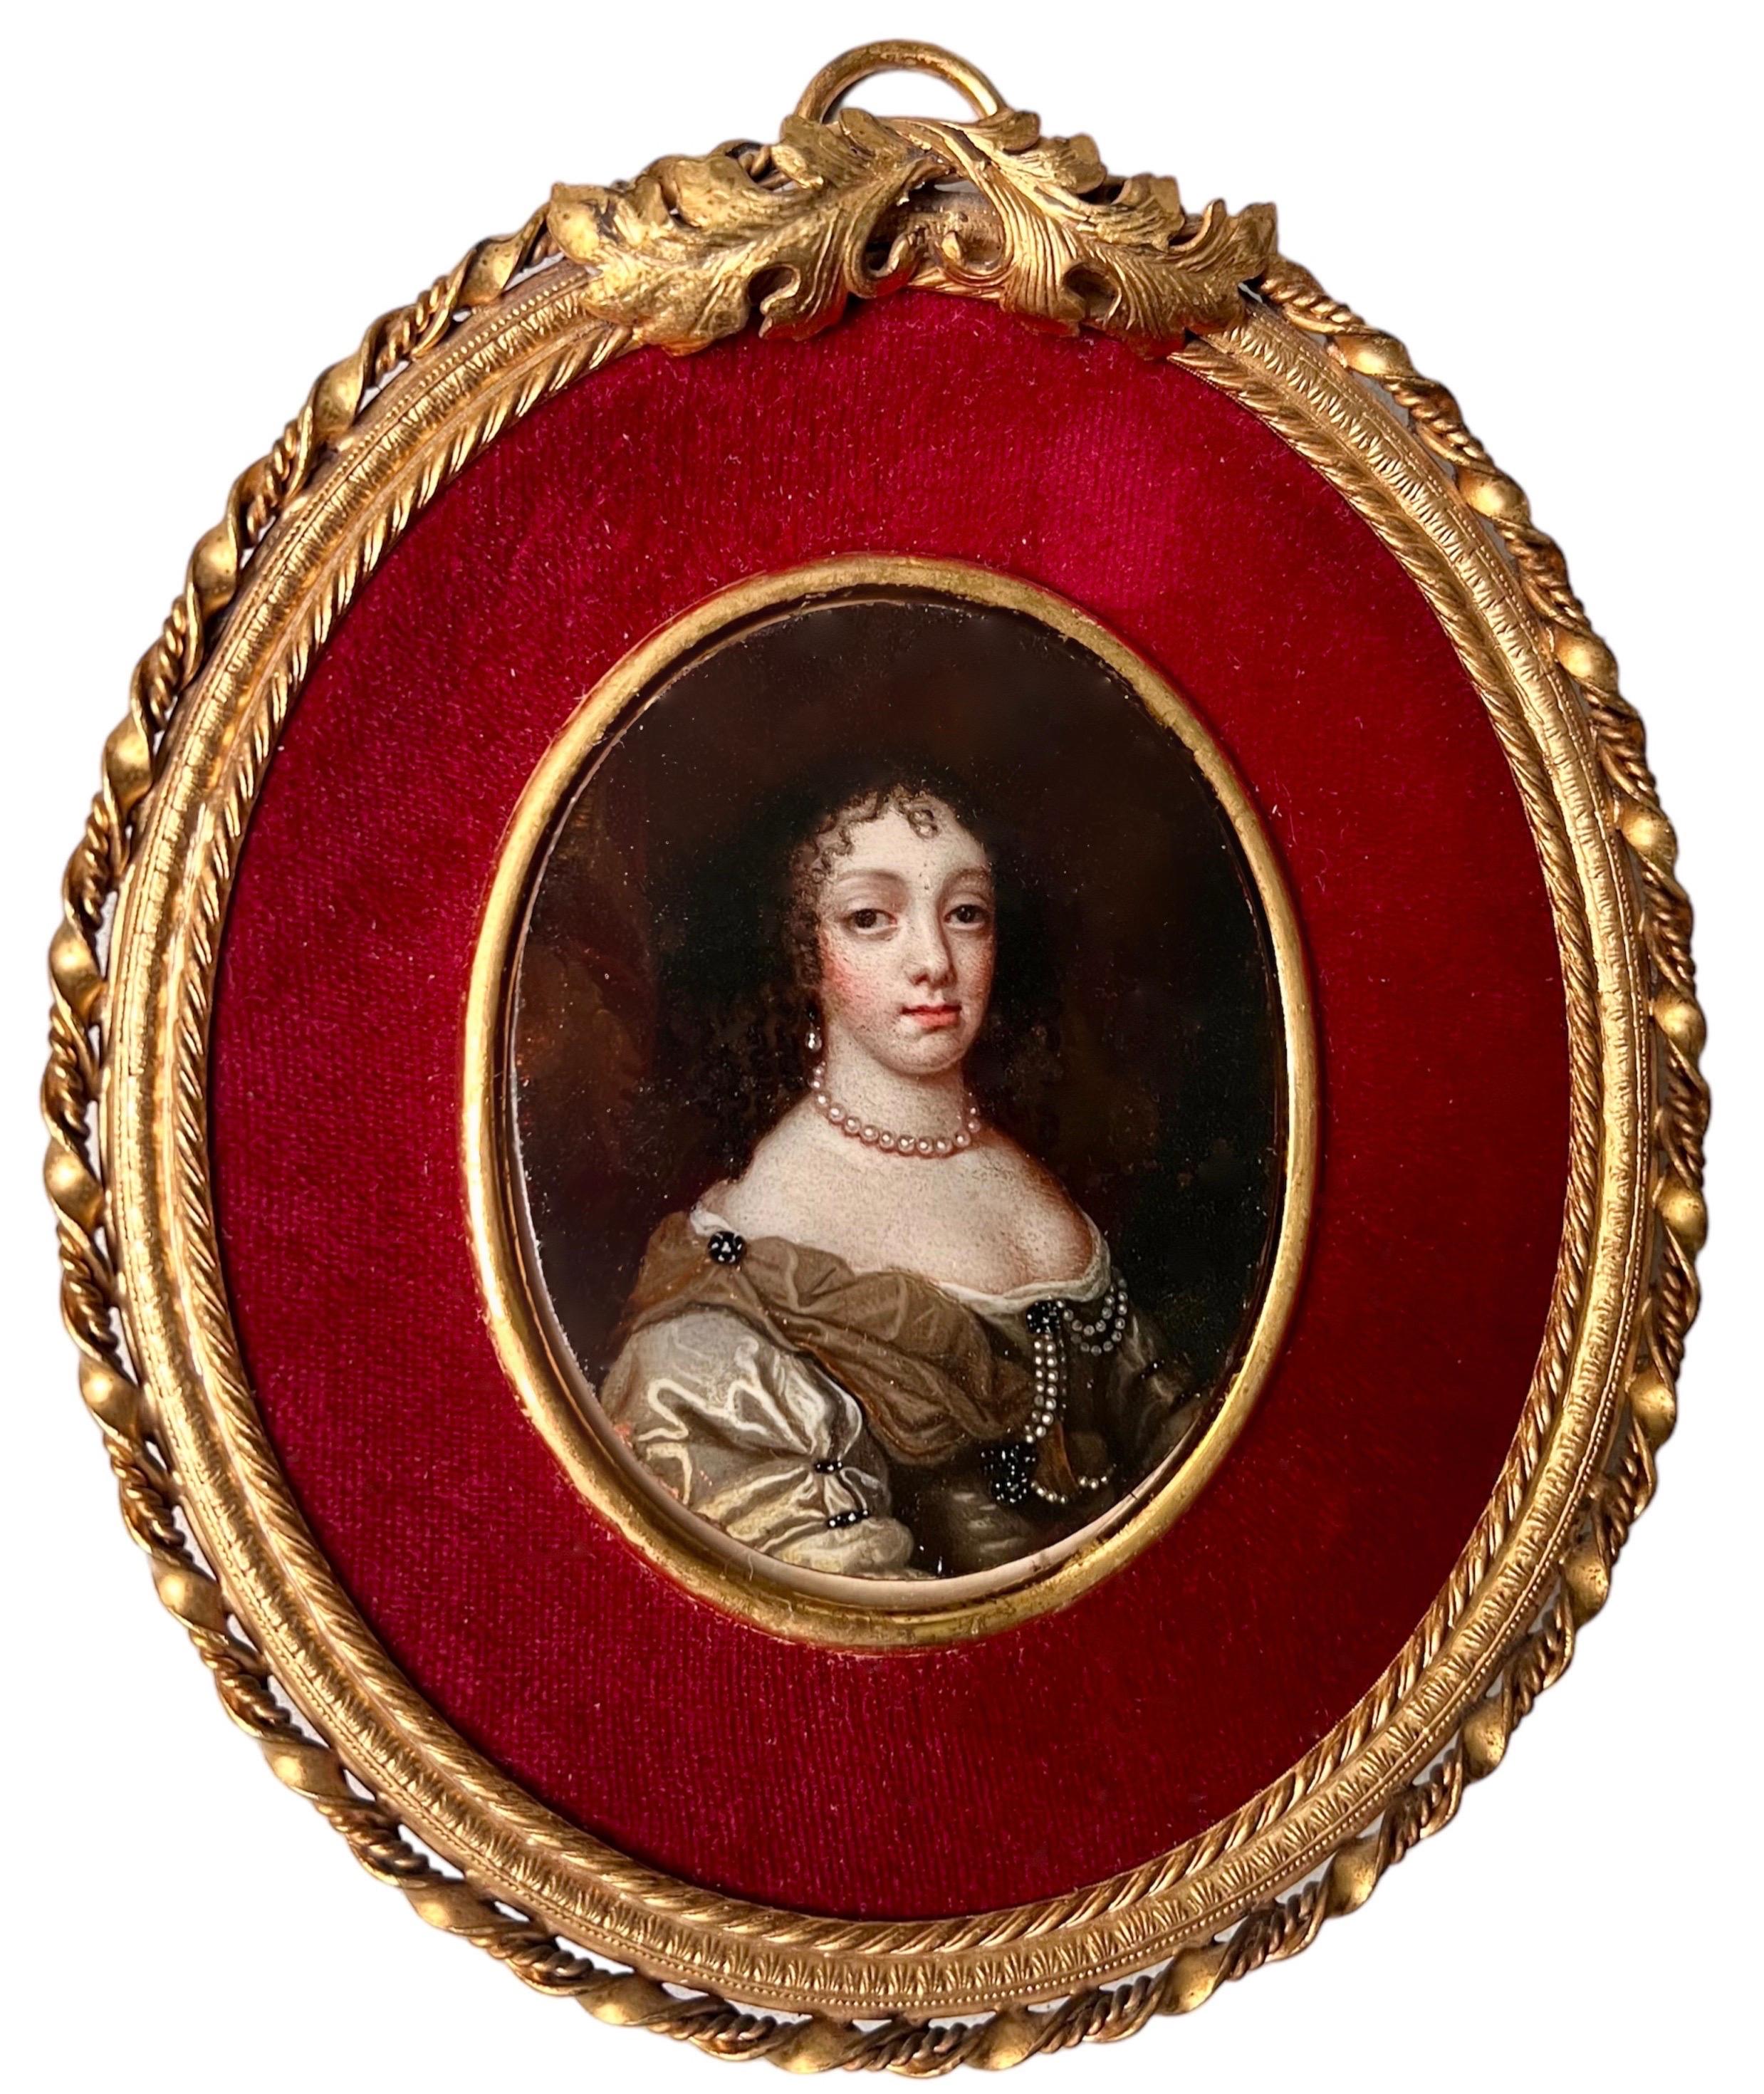 Unknown Figurative Painting - 17th century Old Master miniature of Queen Catherine of Braganza